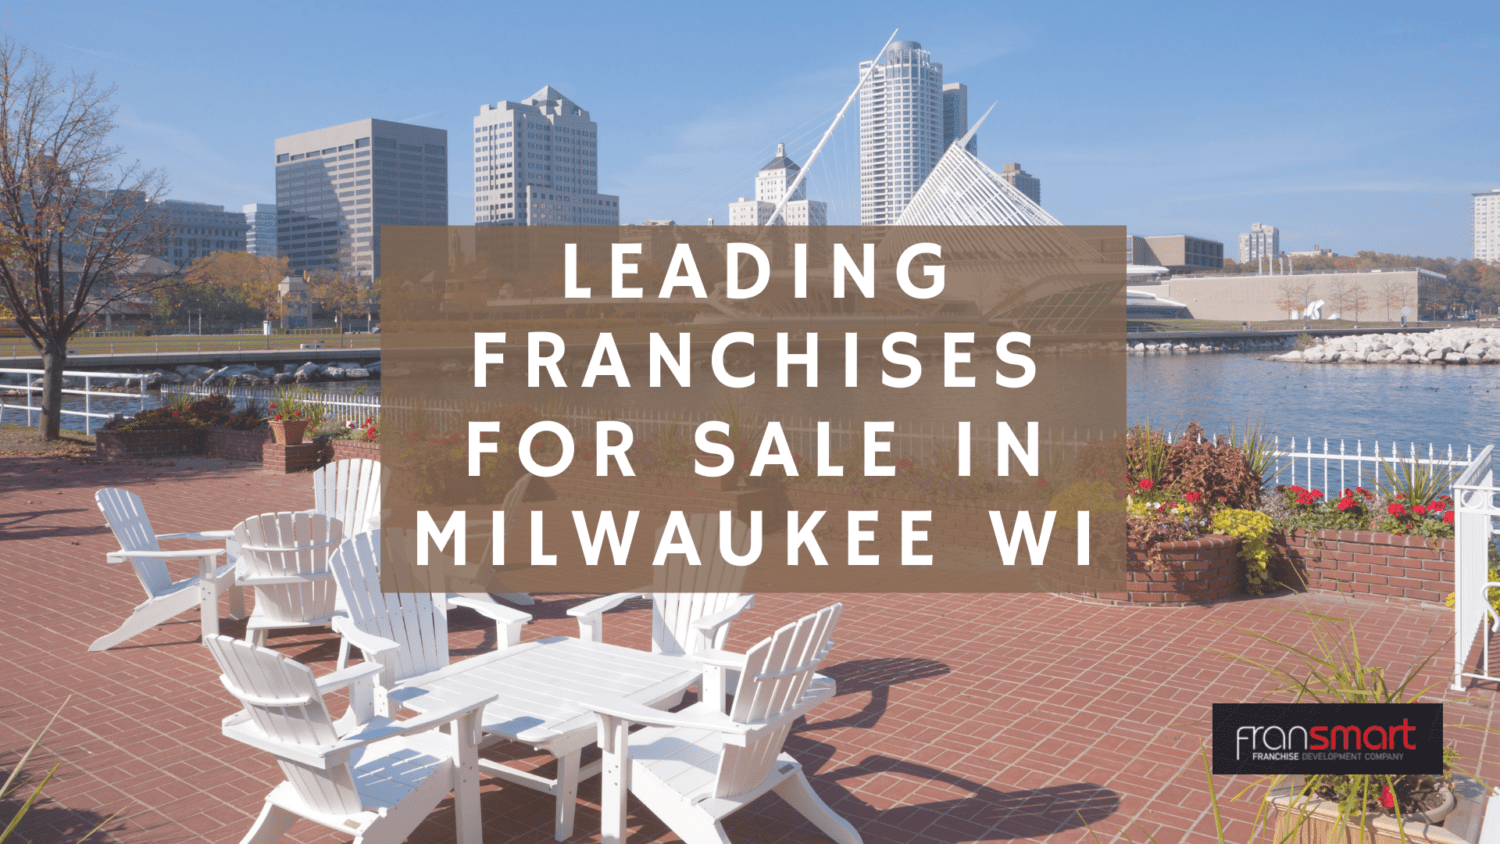 White table and chairs on brick ground with the words Leading Franchises for Sale in Milwaukee WI